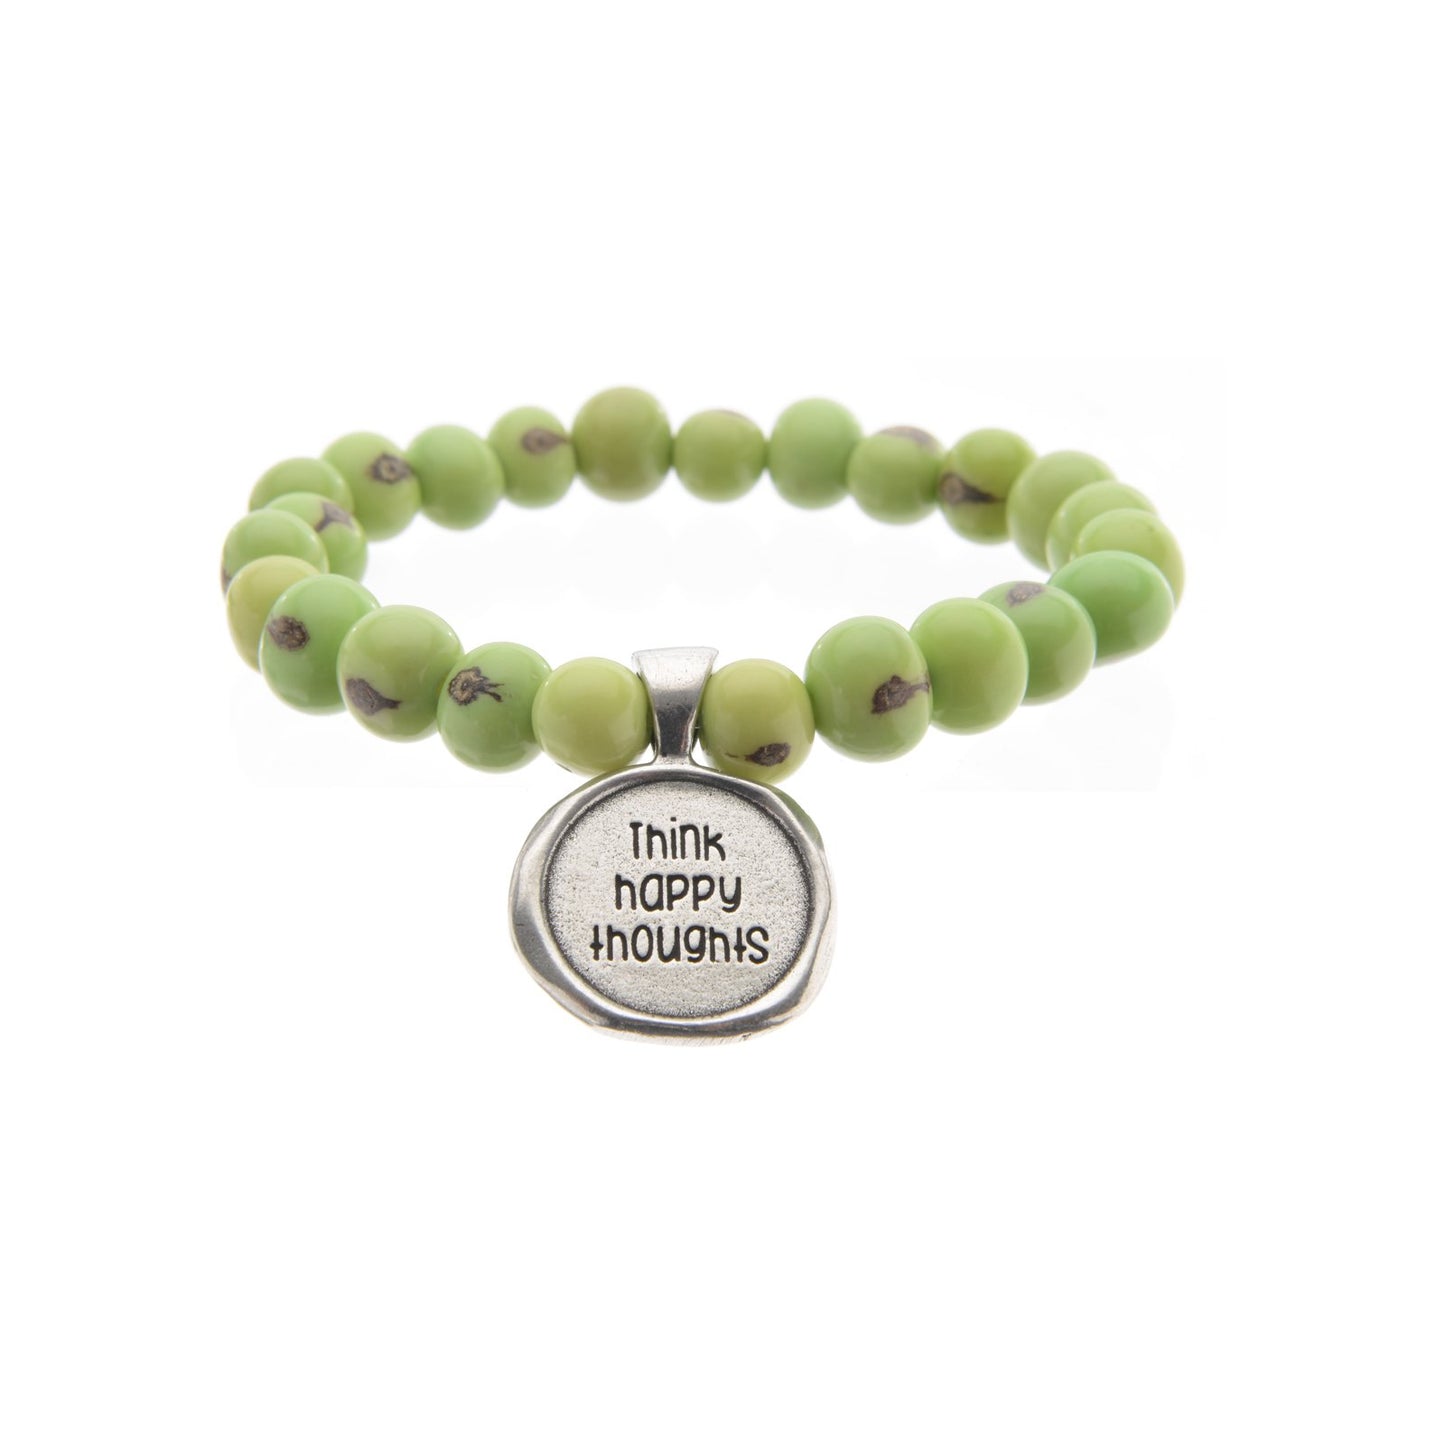 Acai Seeds of Life Bracelet with Wax Seal - Spring Green